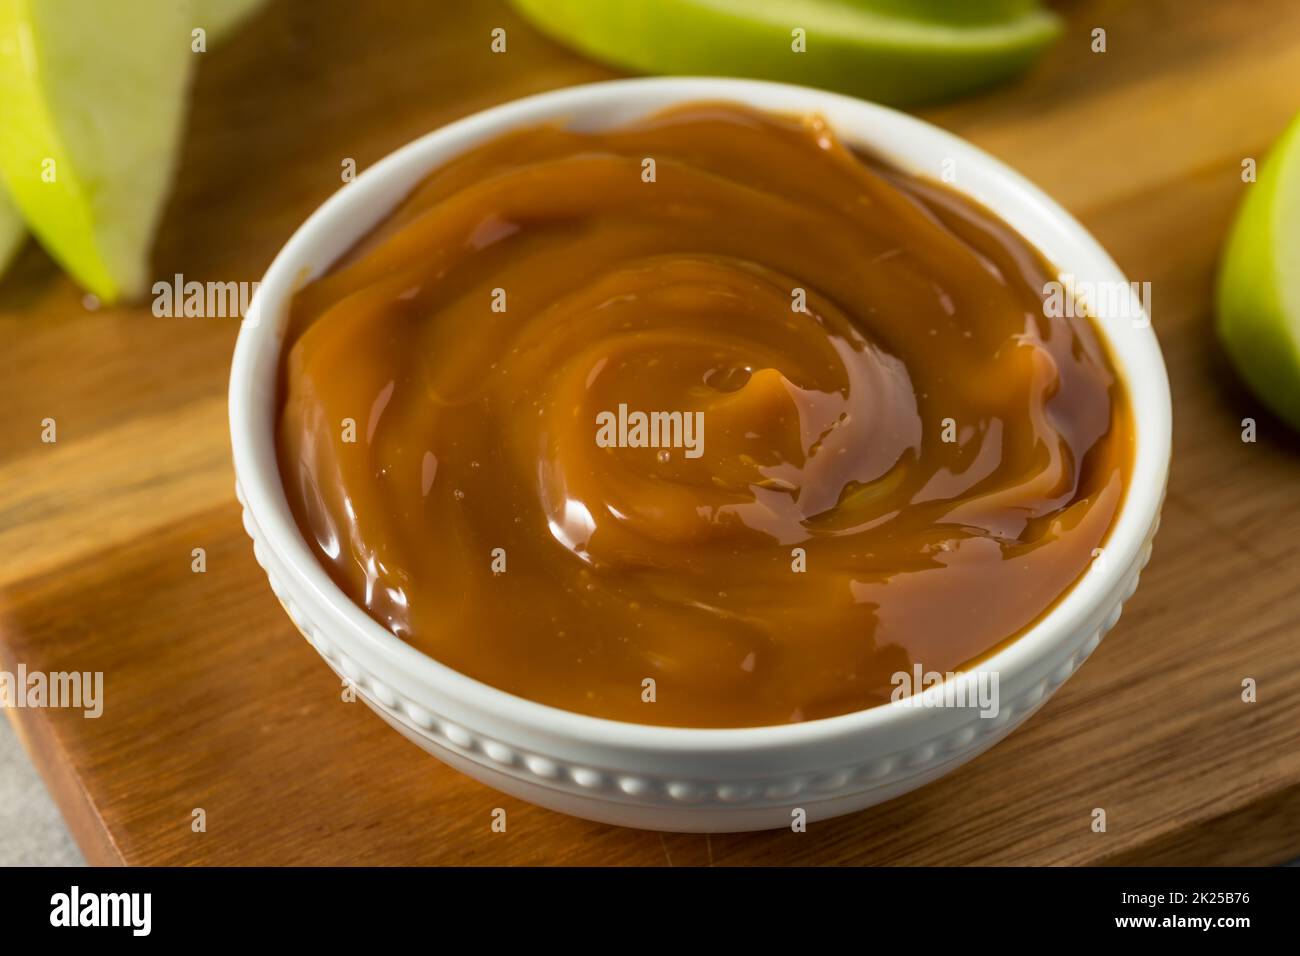 Homemade Caramel Dip with Green Apples Ready to Eat Stock Photo